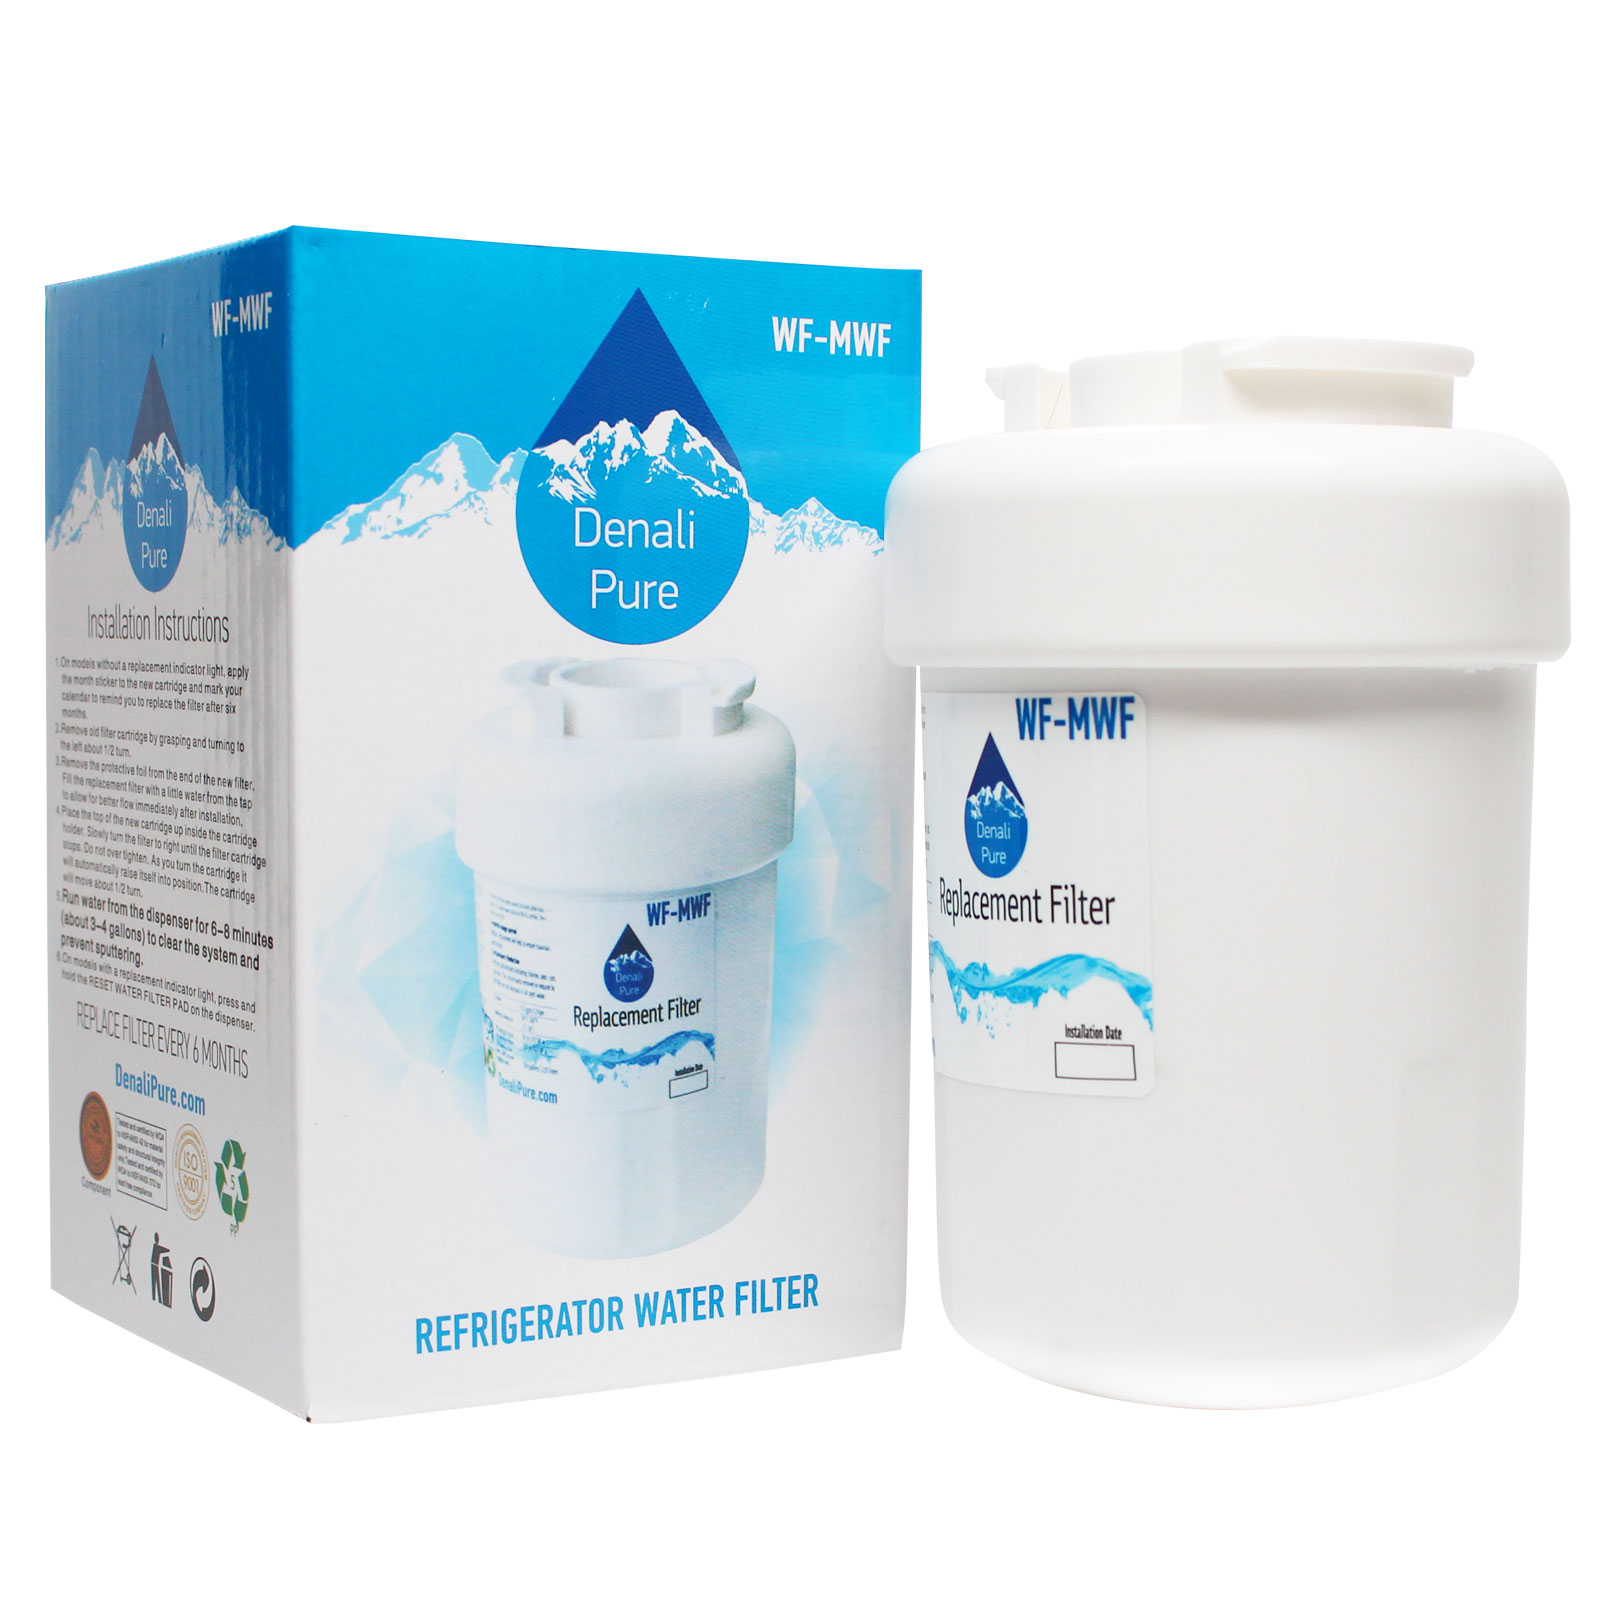 Denali Pure Replacement General Electric HSM25GFRFSA Refrigerator Water Filter - For General Electric MWF, MWFP Water Filter Cartridge